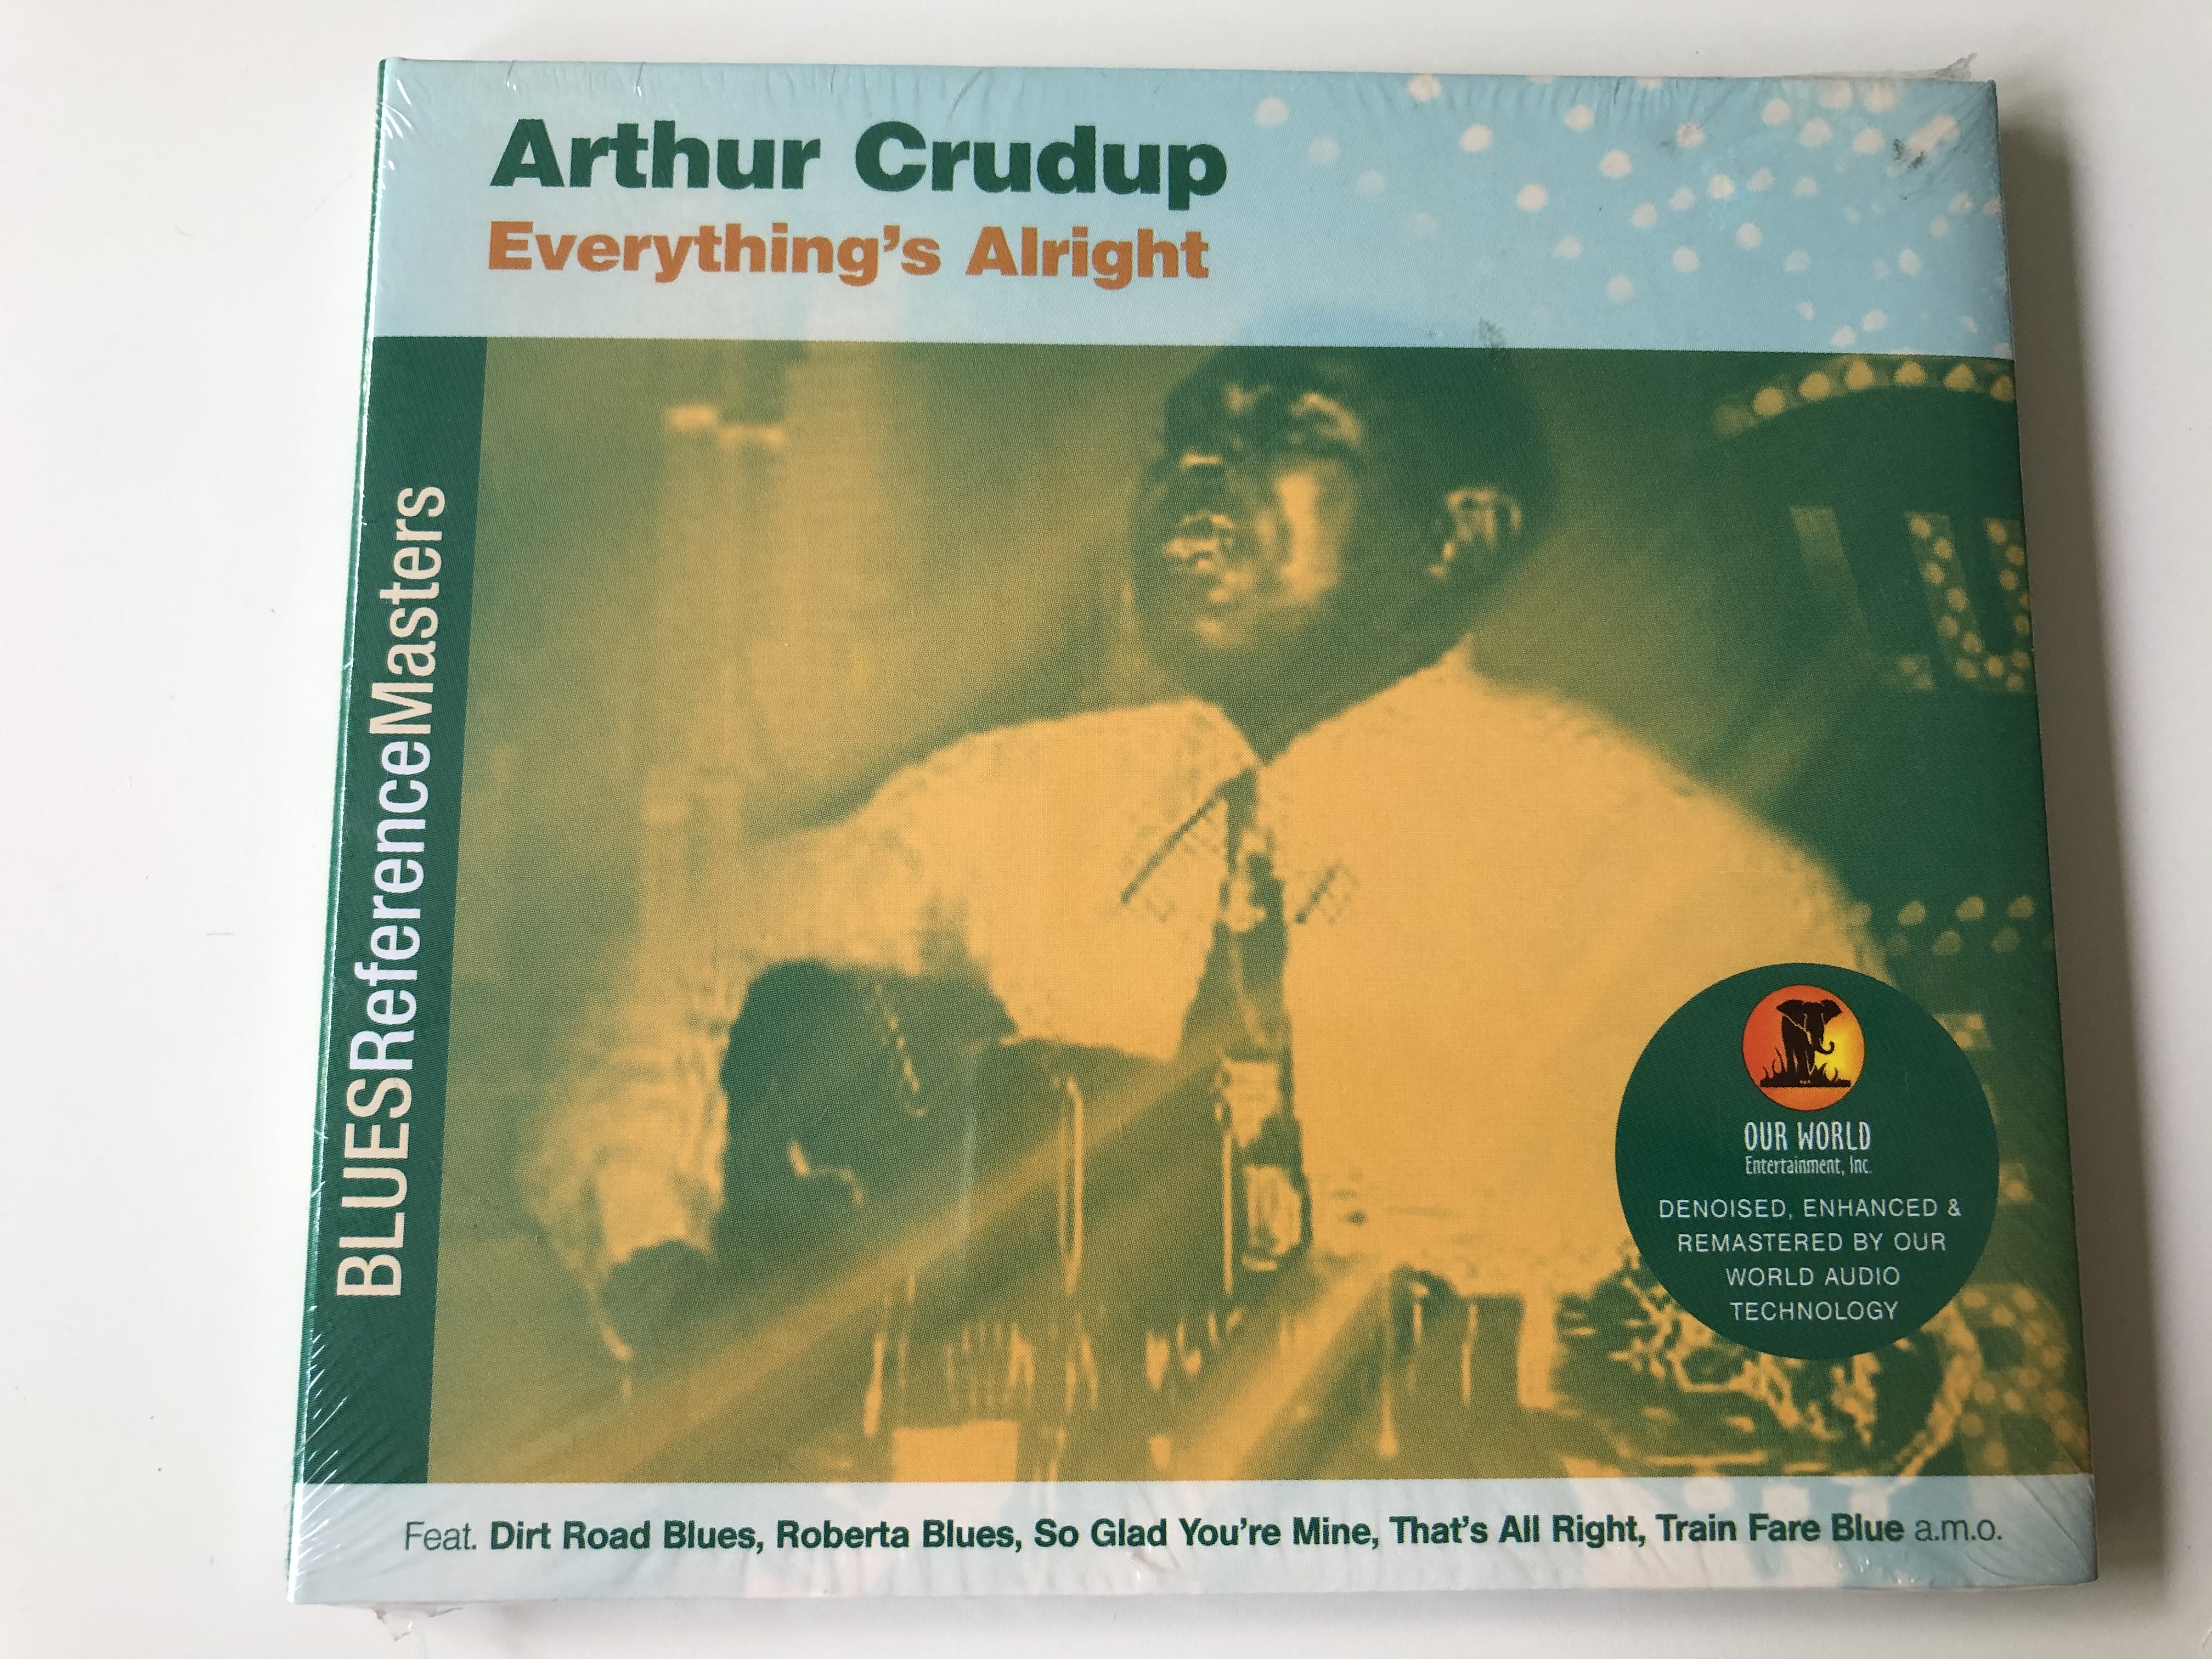 arthur-crudup-everything-s-alright-feat.-dirt-road-blues-so-glad-you-re-mine-that-s-all-right-train-fare-blues-a.m.o.-blues-reference-masters-our-world-entertainment-inc.-audio-cd-200-1-.jpg